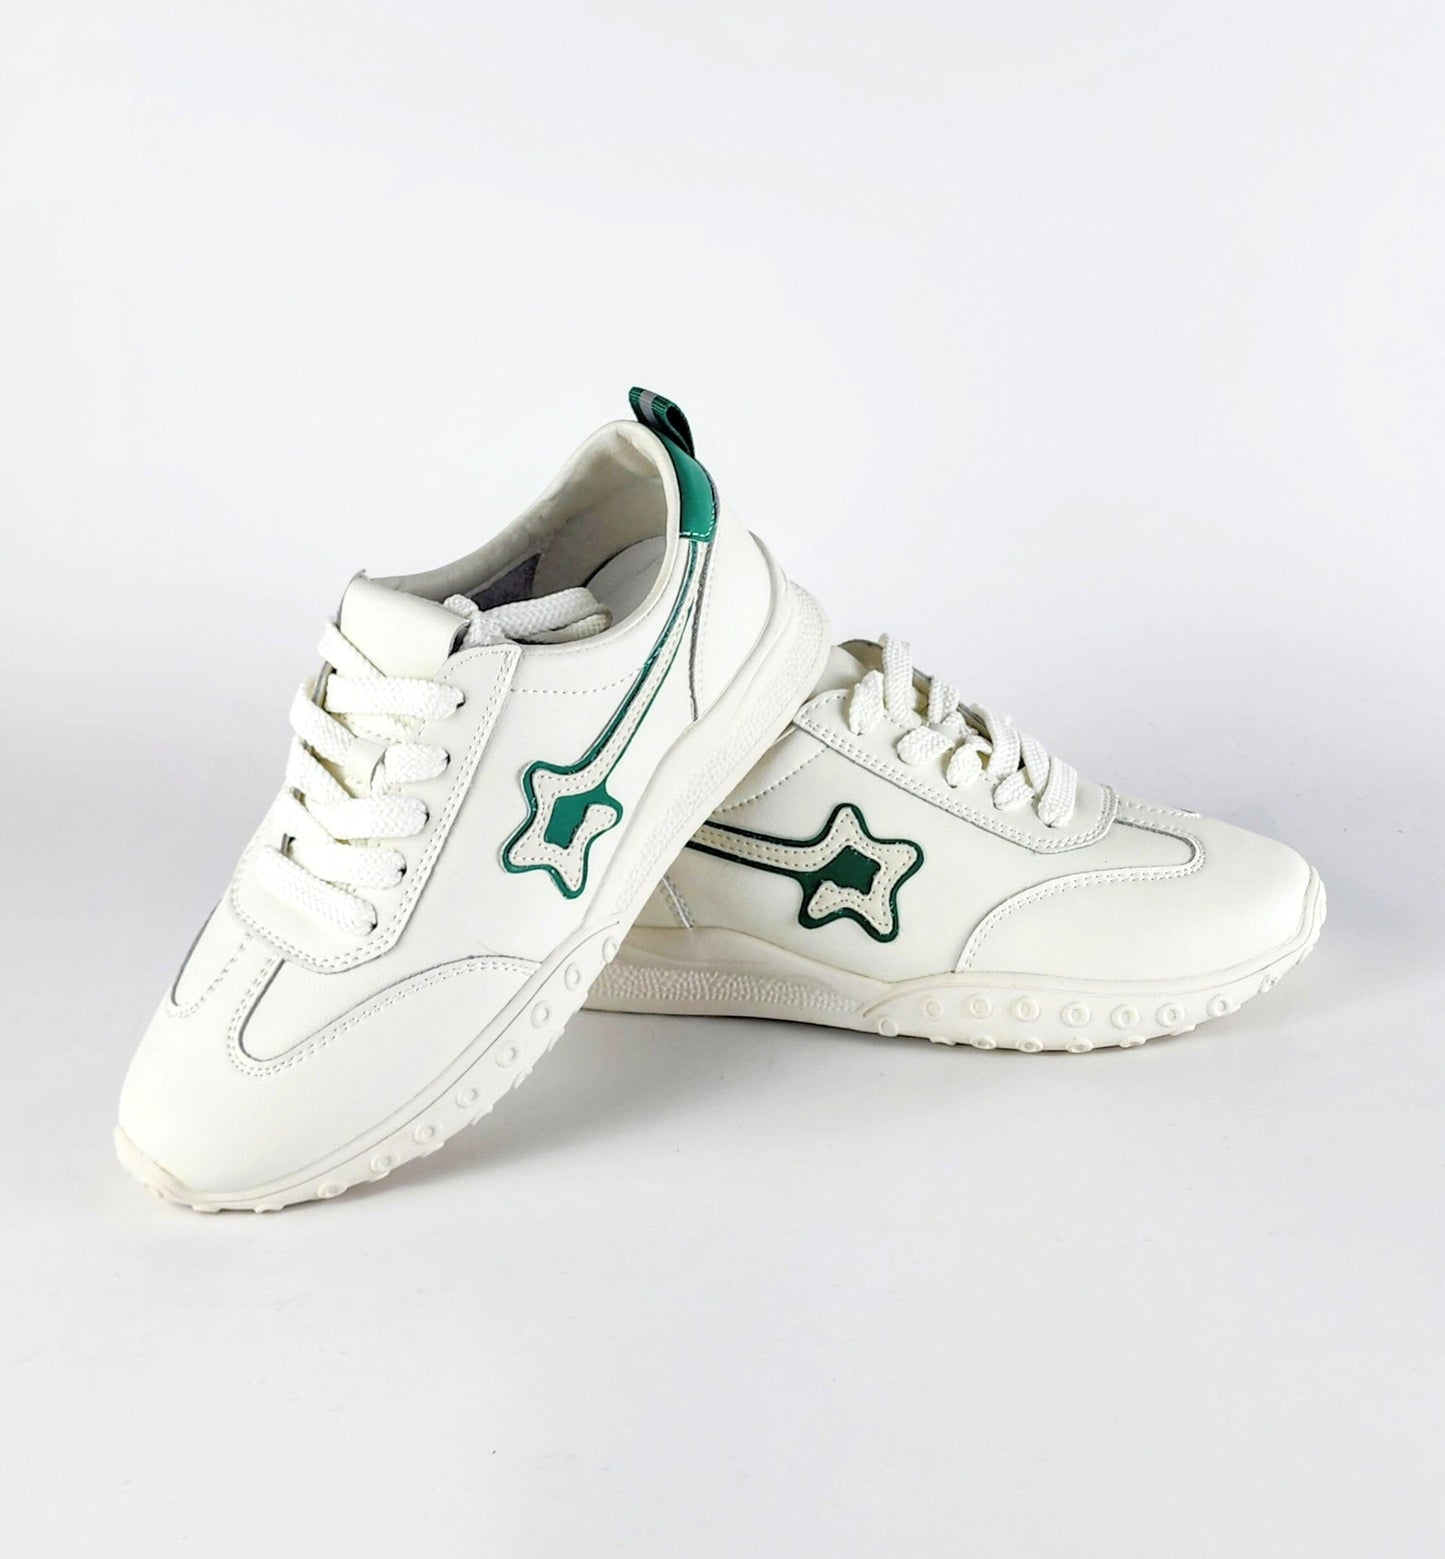 SS23009 White leather sneakers with star and flexible sole sneakers Sam Star Shoes Green 39 